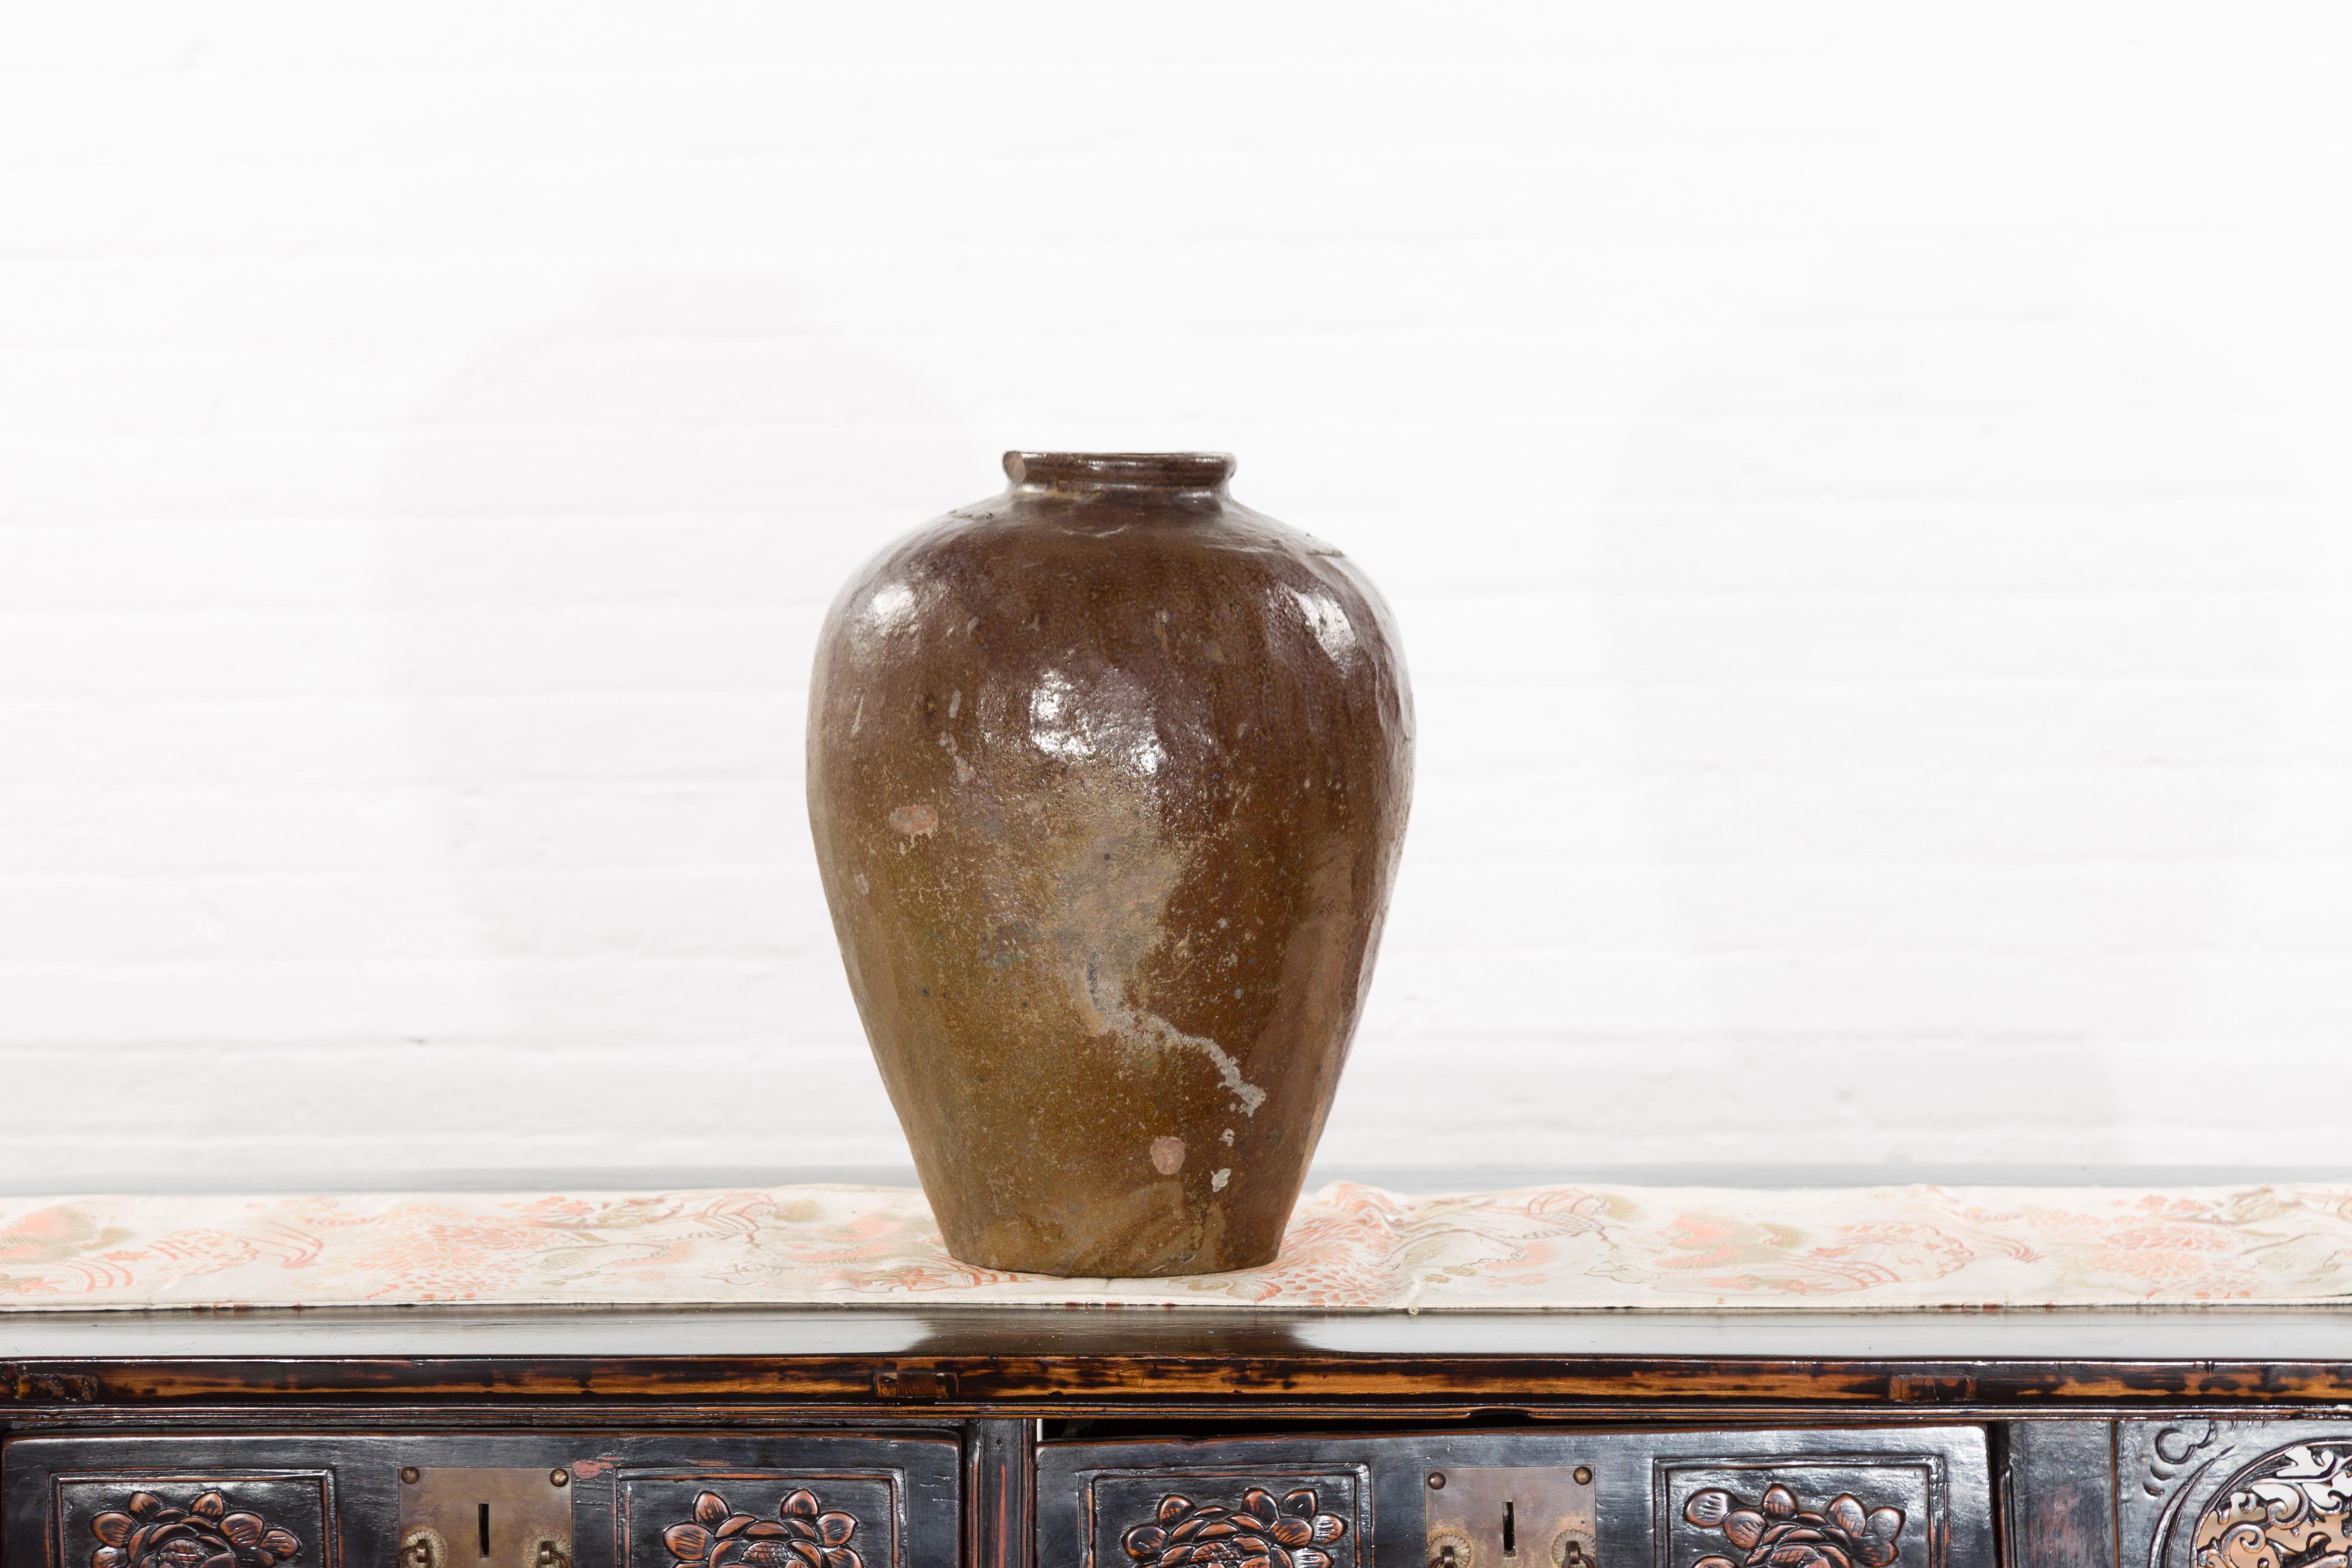 An antique Japanese brown water jar from the 19th century, with distressed patina. Sold as is, this Japanese water jar features a generous tapering body boasting a nicely weathered brown glaze. Topped with a circular beveled lip, this 19th century